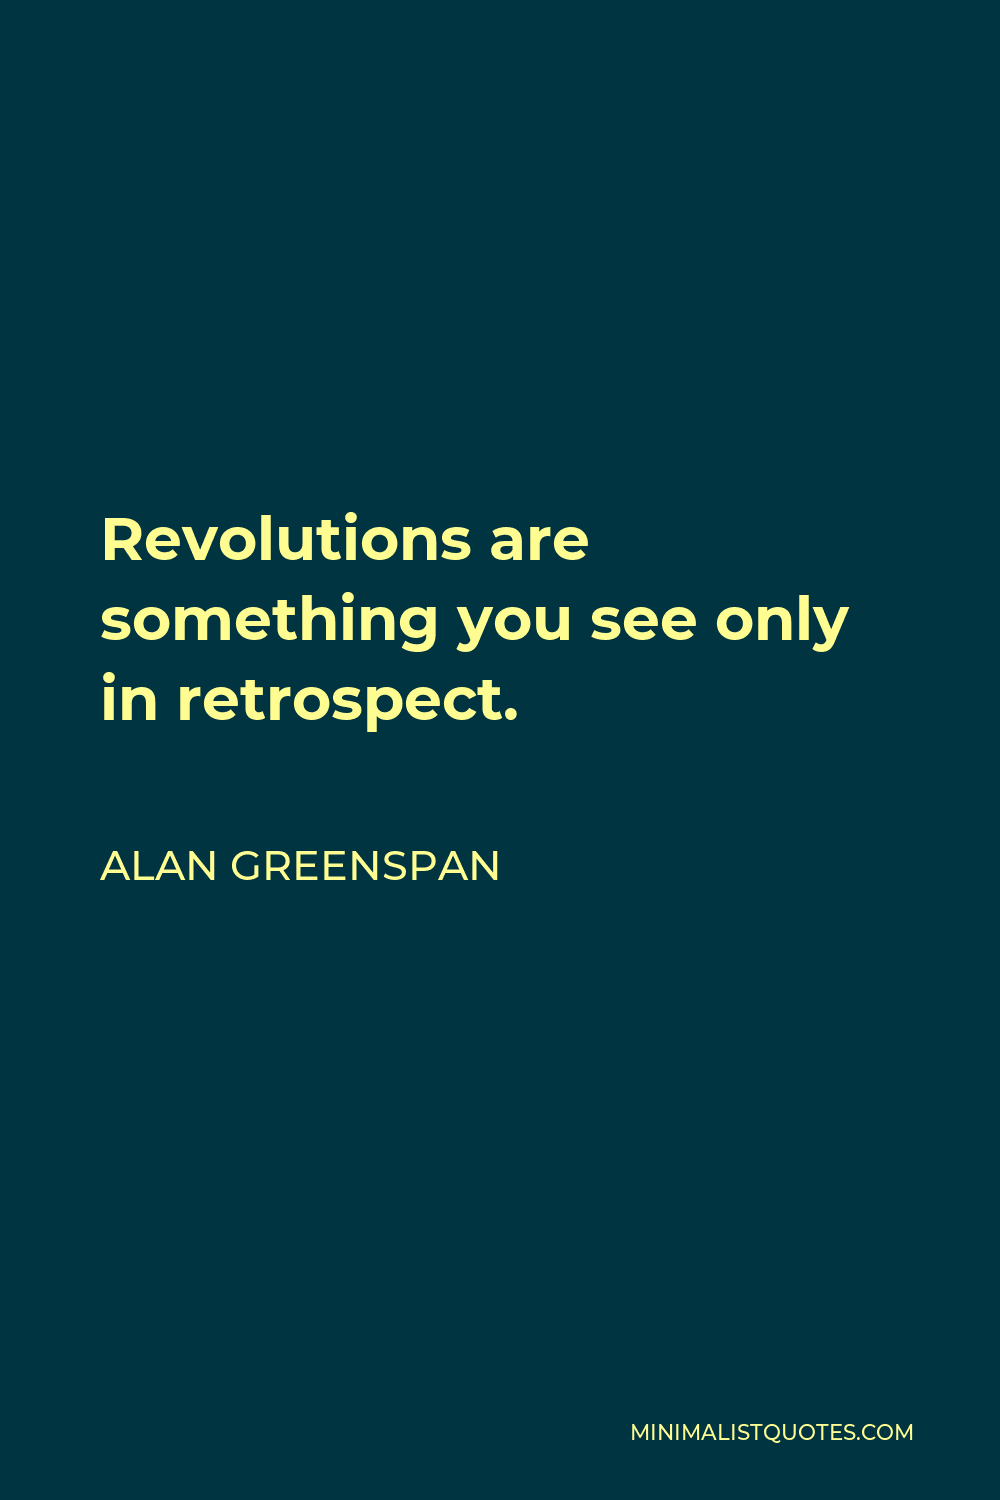 Alan Greenspan Quote - Revolutions are something you see only in retrospect.